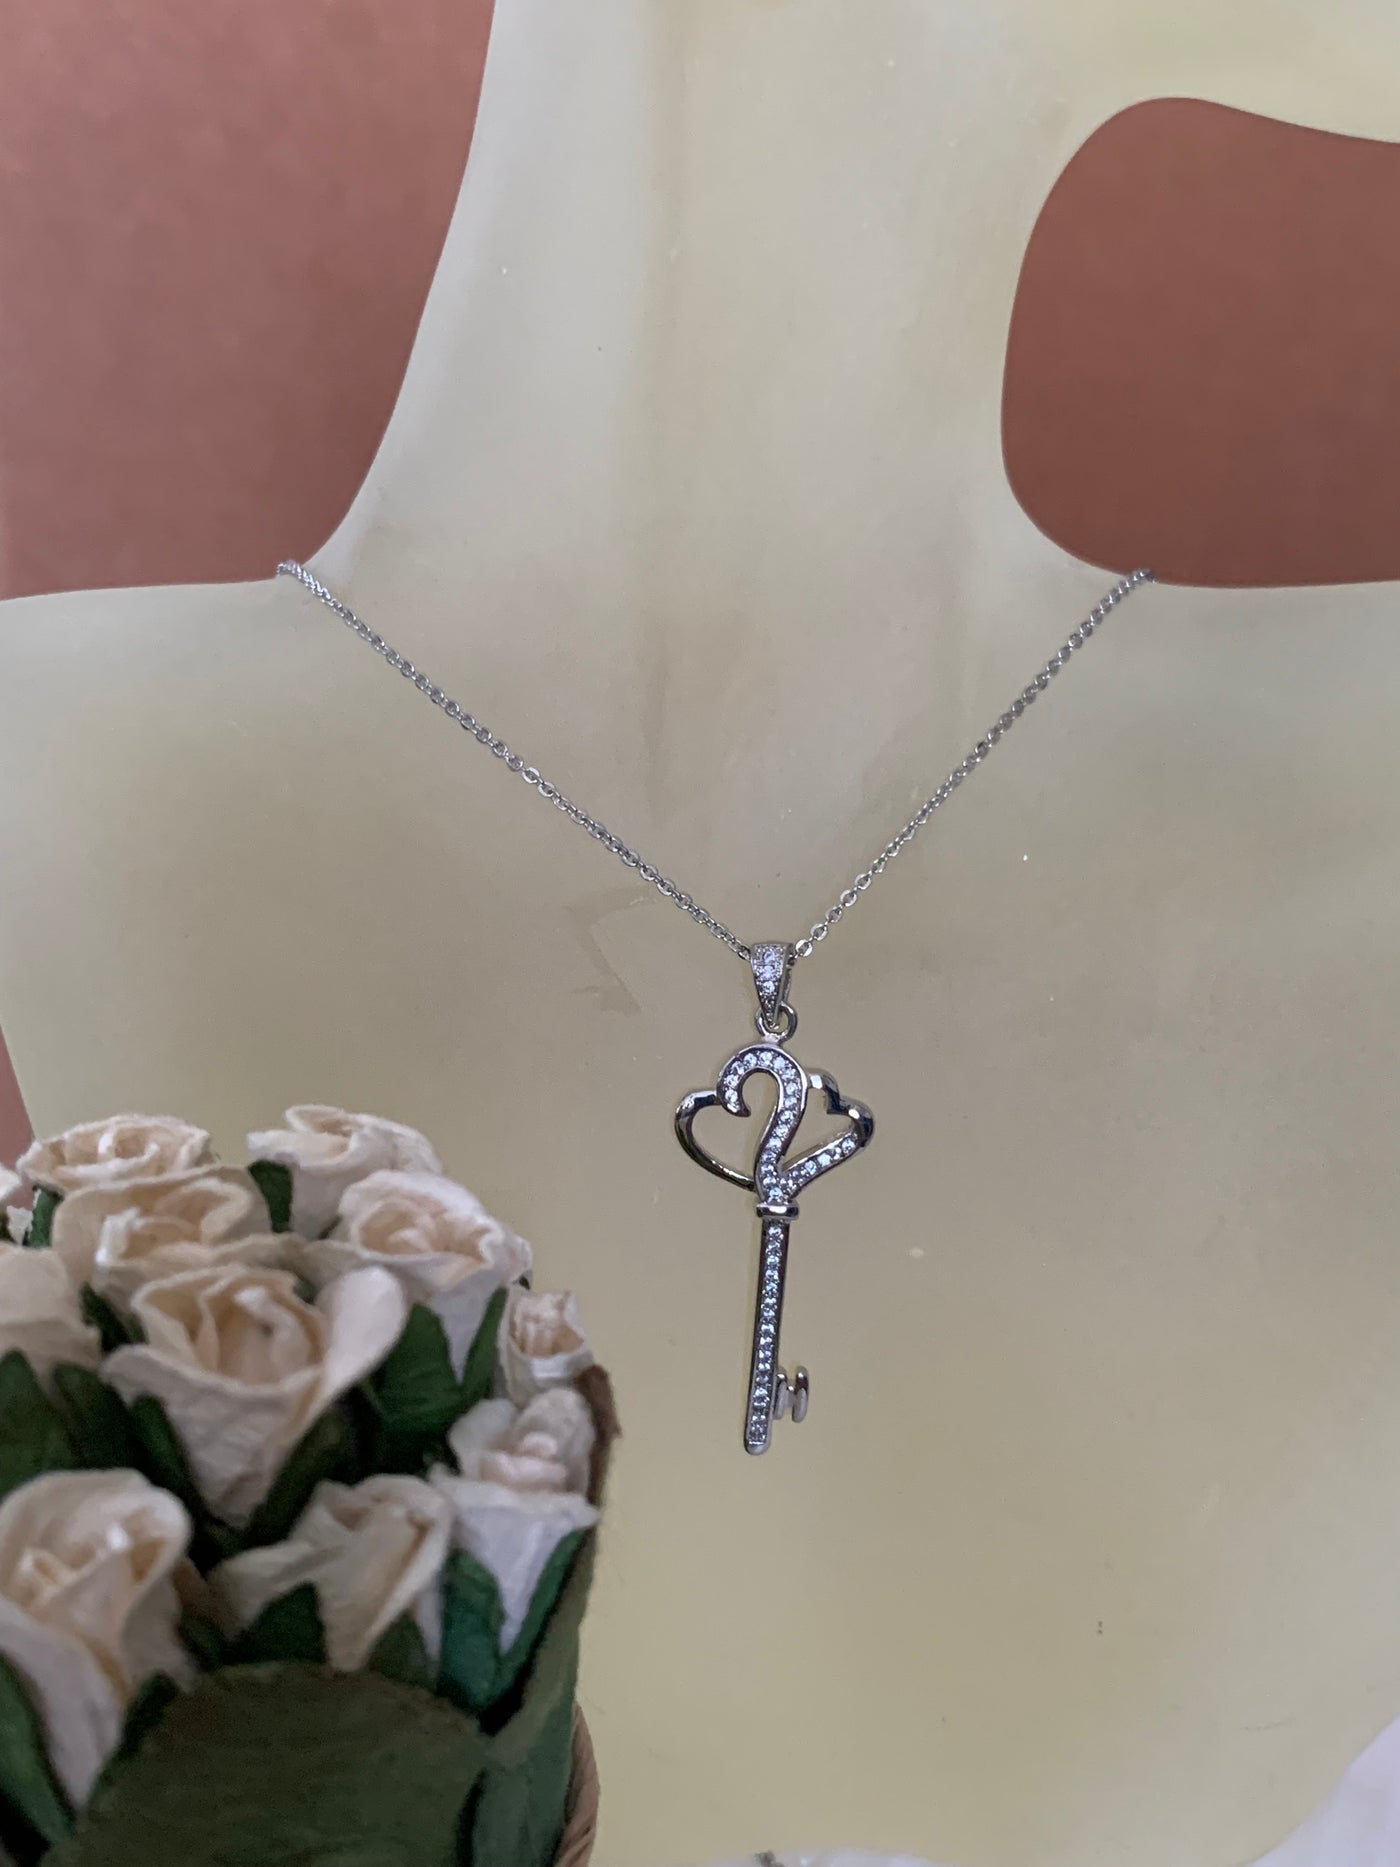 Pave Set Cubic Zirconia Double Heart Key Pendant Necklace in Silver Tone